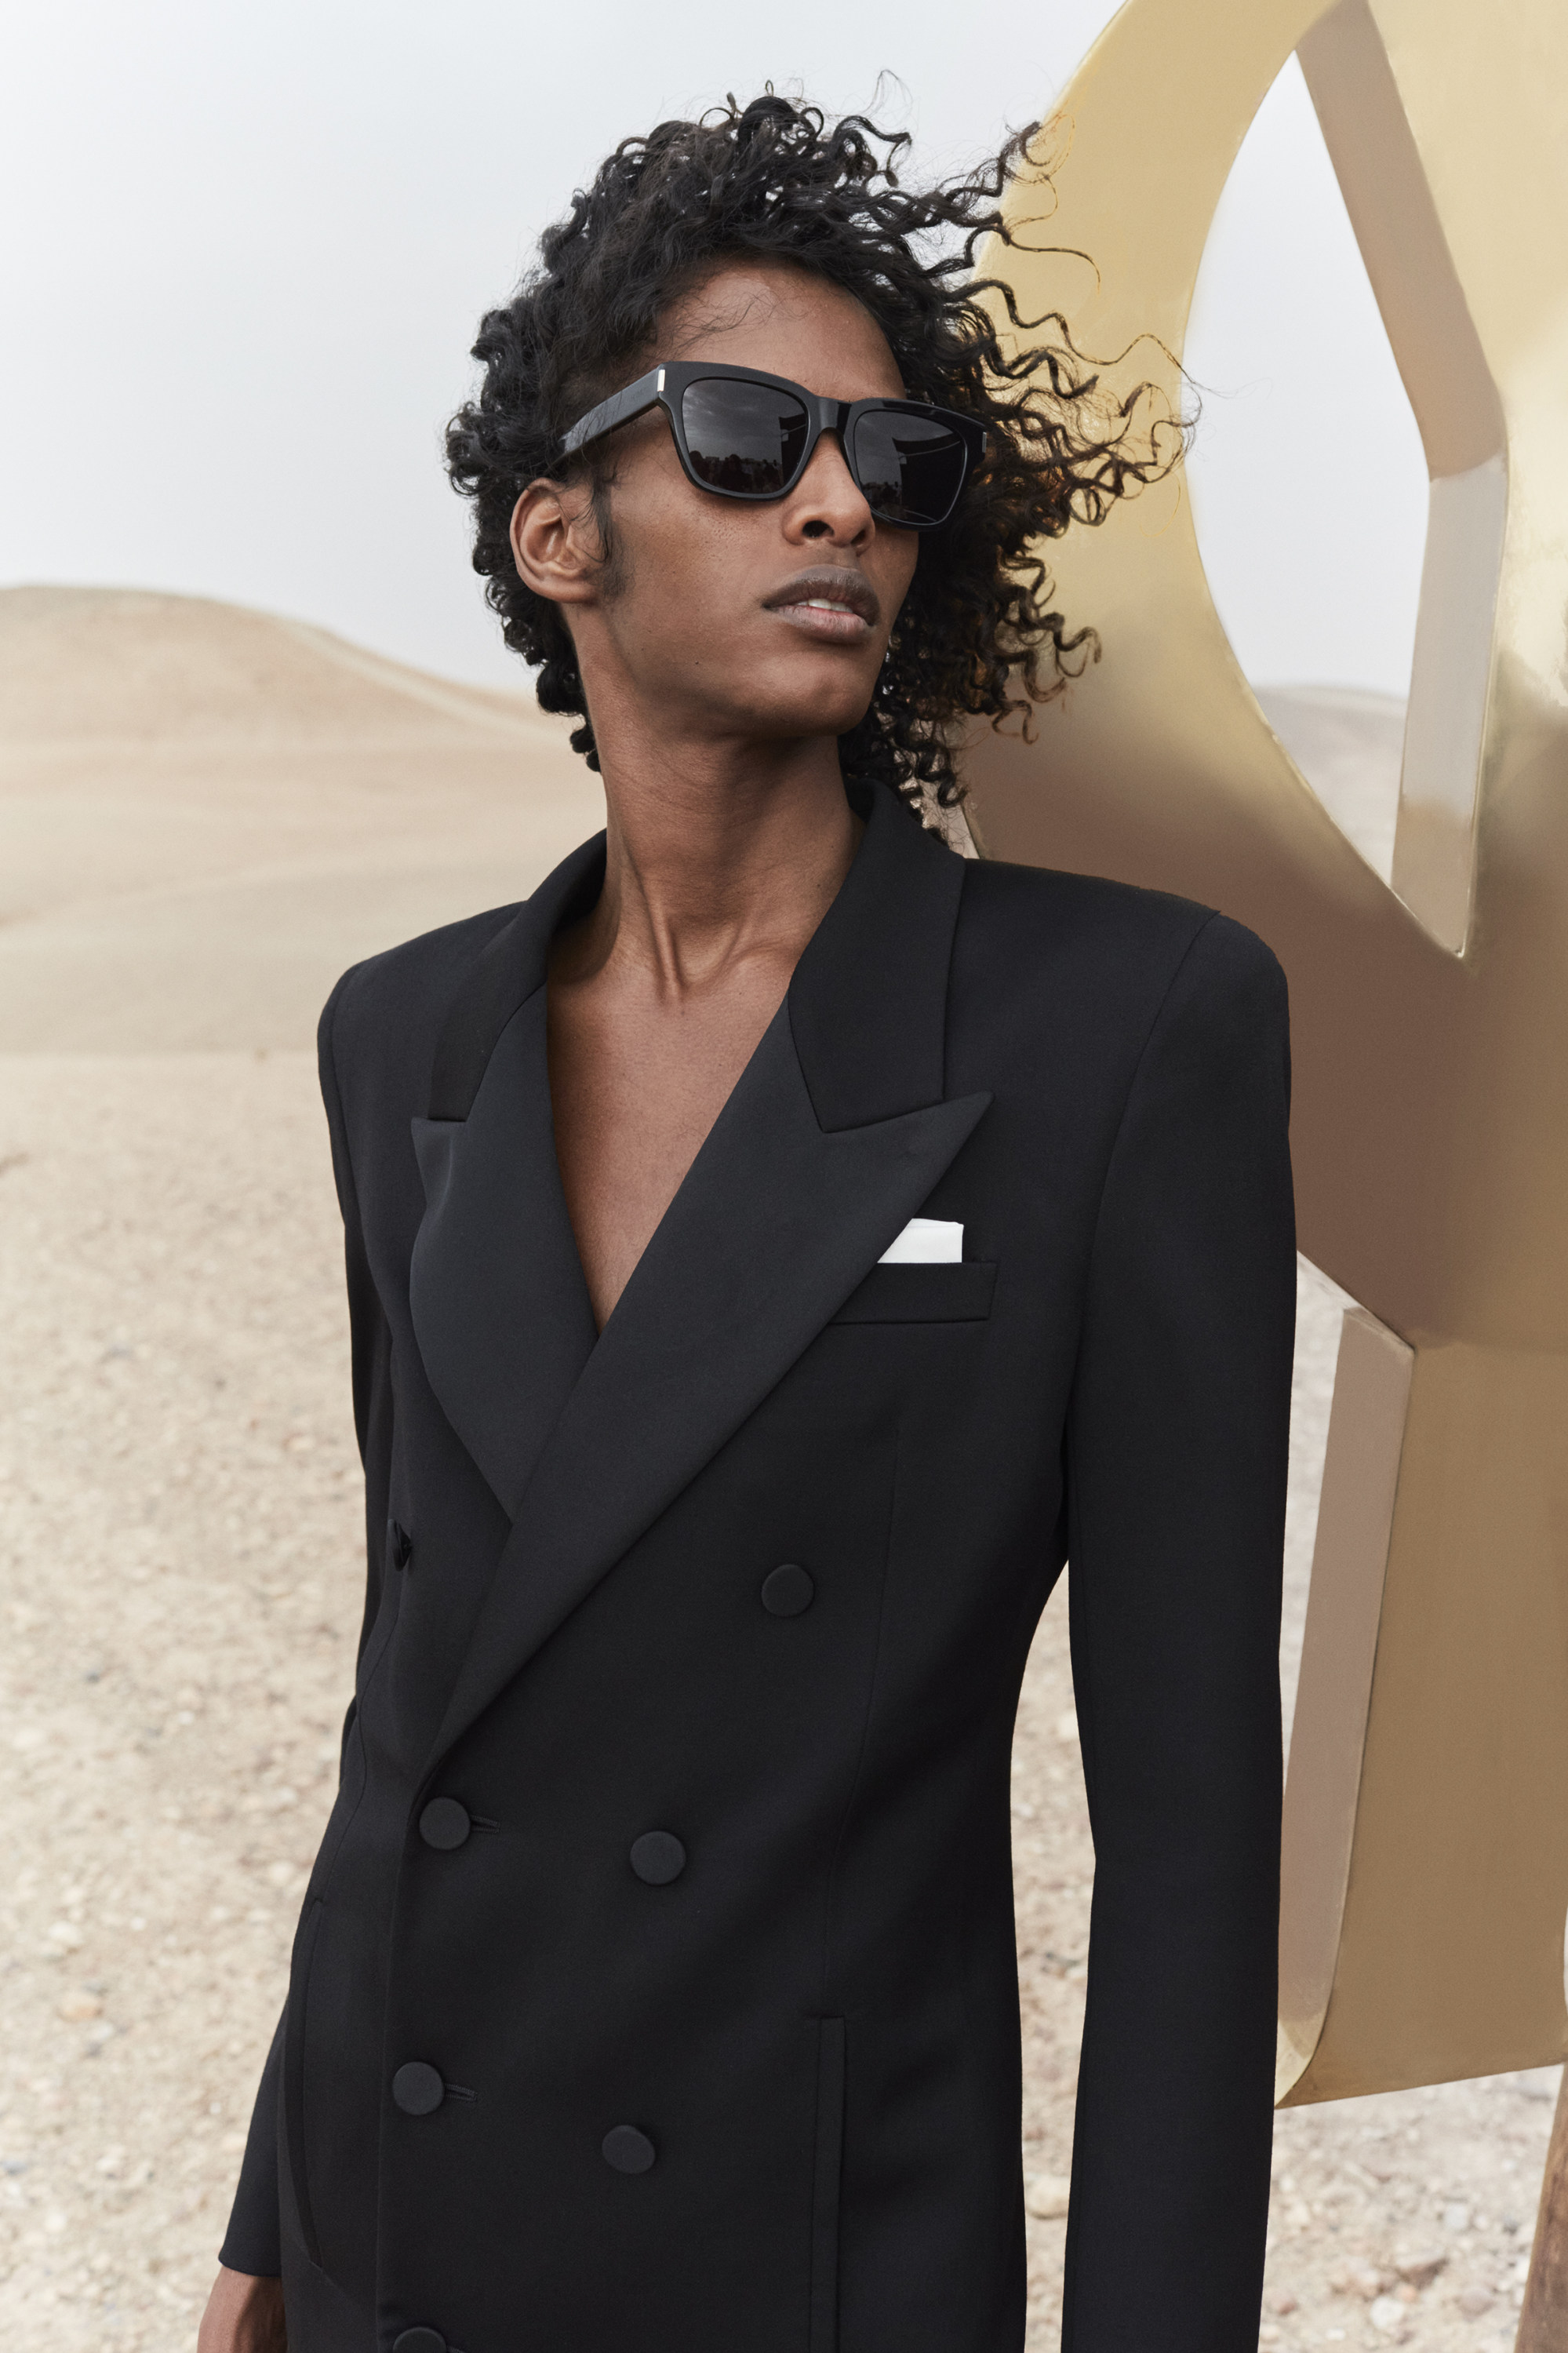 YSL spring/summer 2023 show in Moroccan desert is reminiscent of a